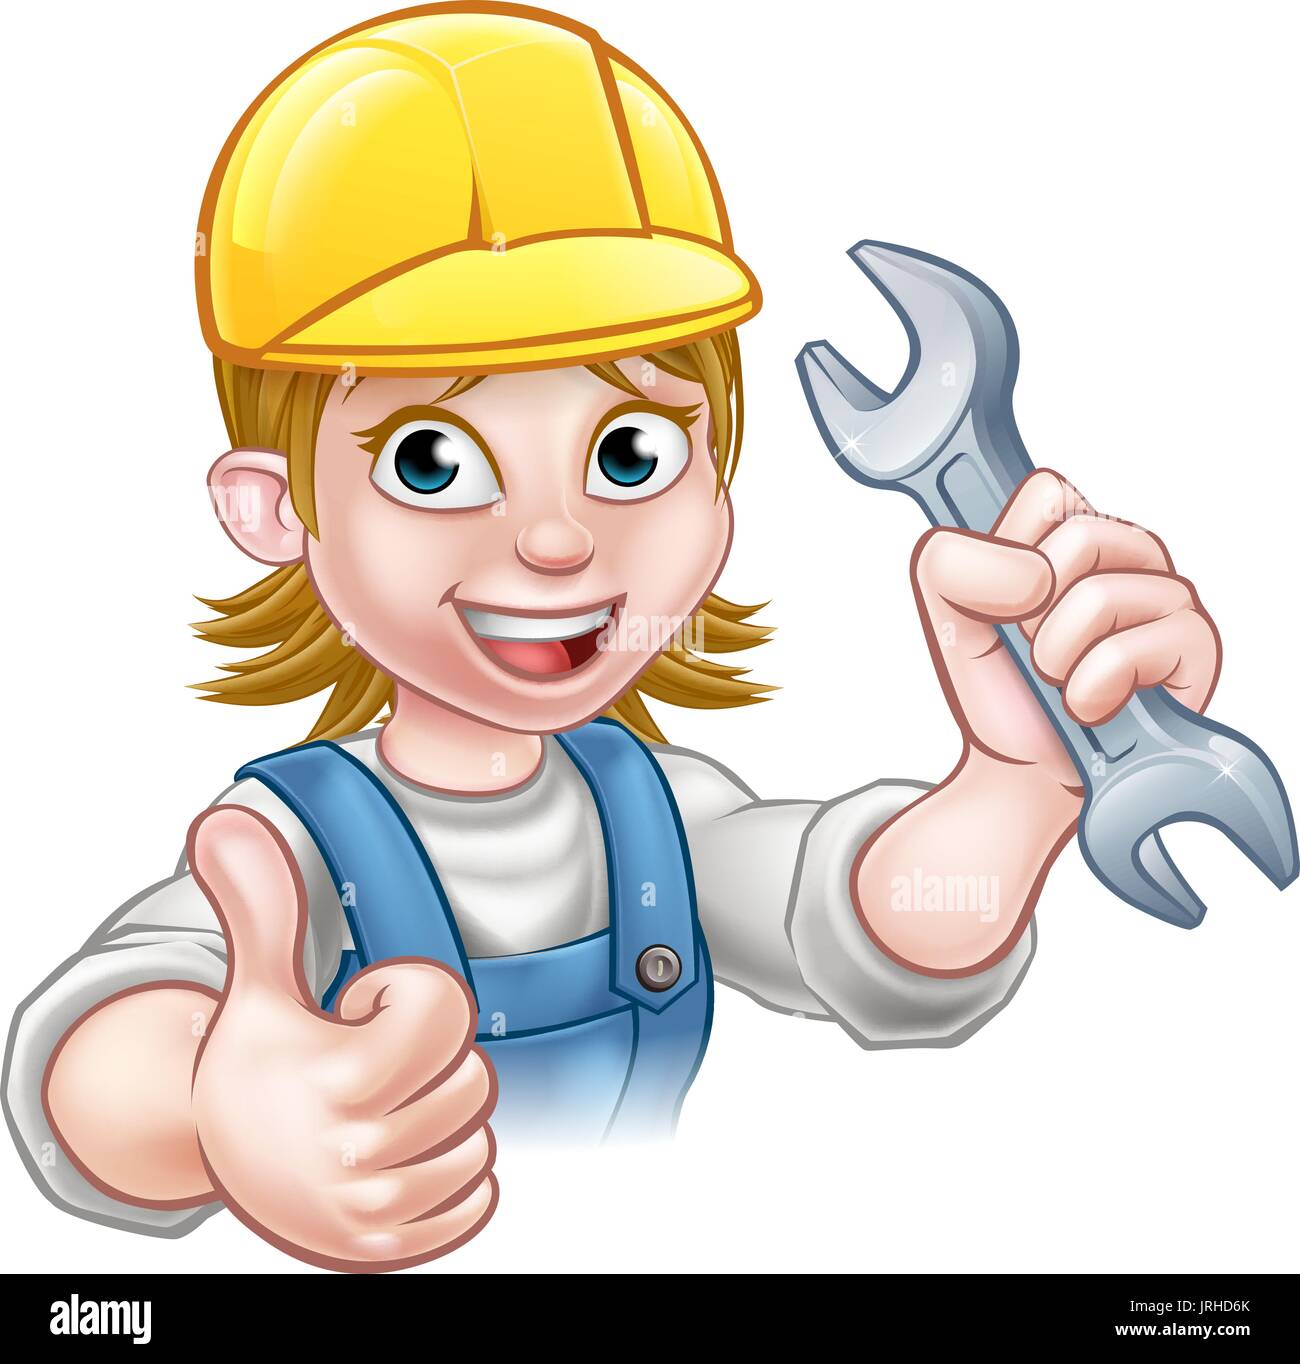 Female Plumber Cartoon Character with Spanner Stock Vector